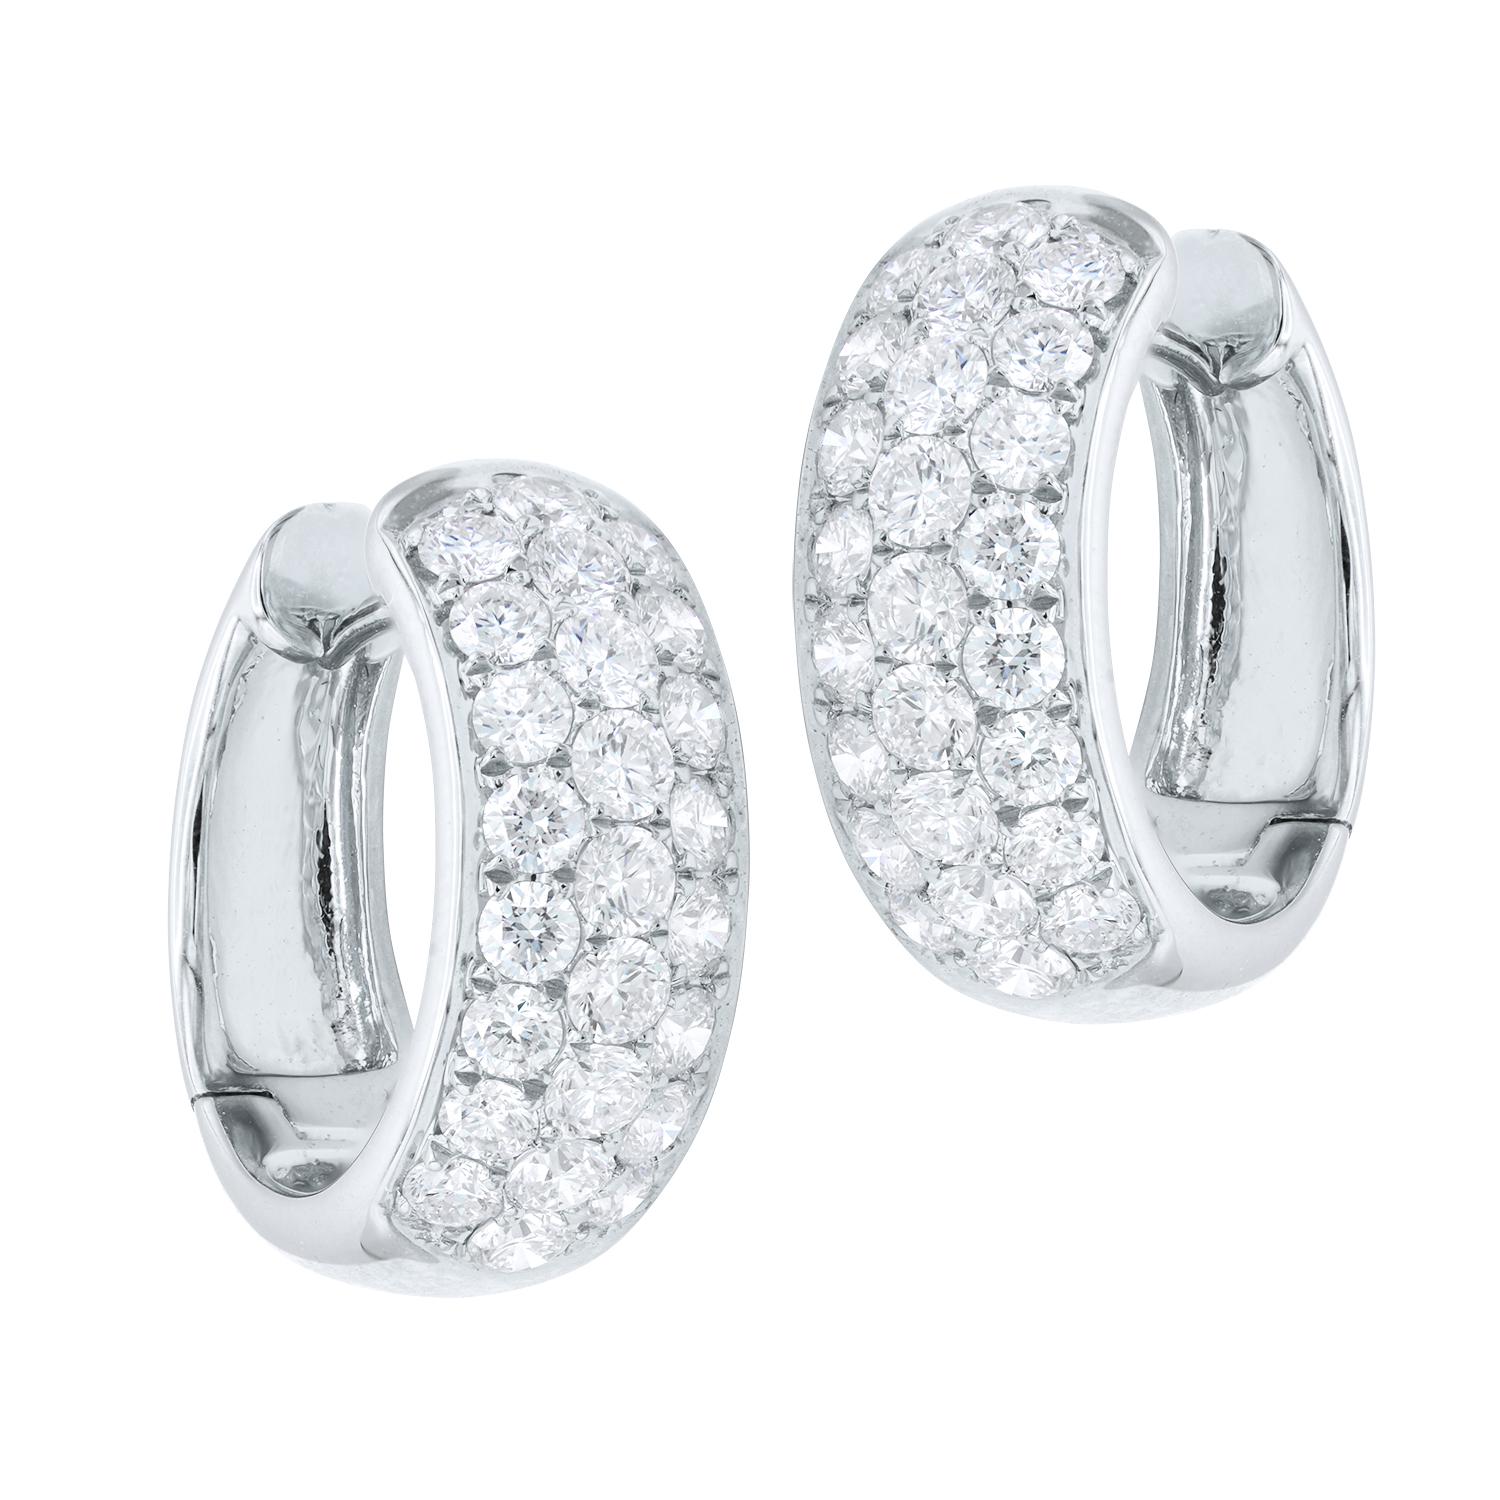 Contemporary 18 Karat White Gold 3 Rows of Diamond, Hoop Earrings For Sale